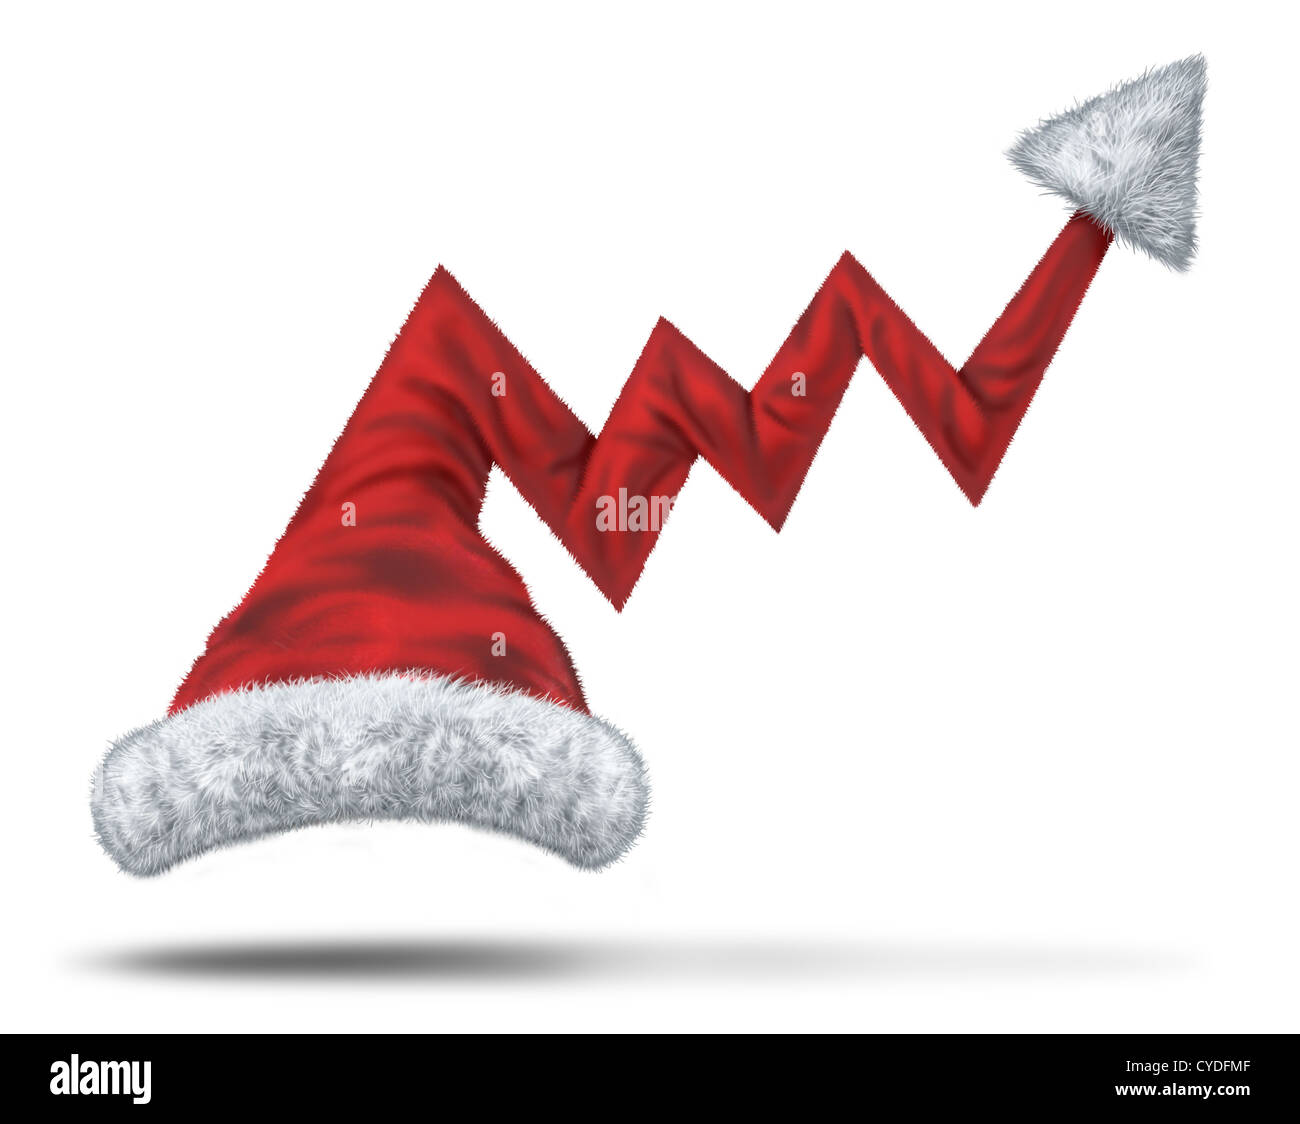 Holiday profits and Christmas sales with a santaclause hat in the shape of an upward financial graph with an arrow pointing to big winter seasonal success in retail and services sector on the internet and traditional stores. Stock Photo